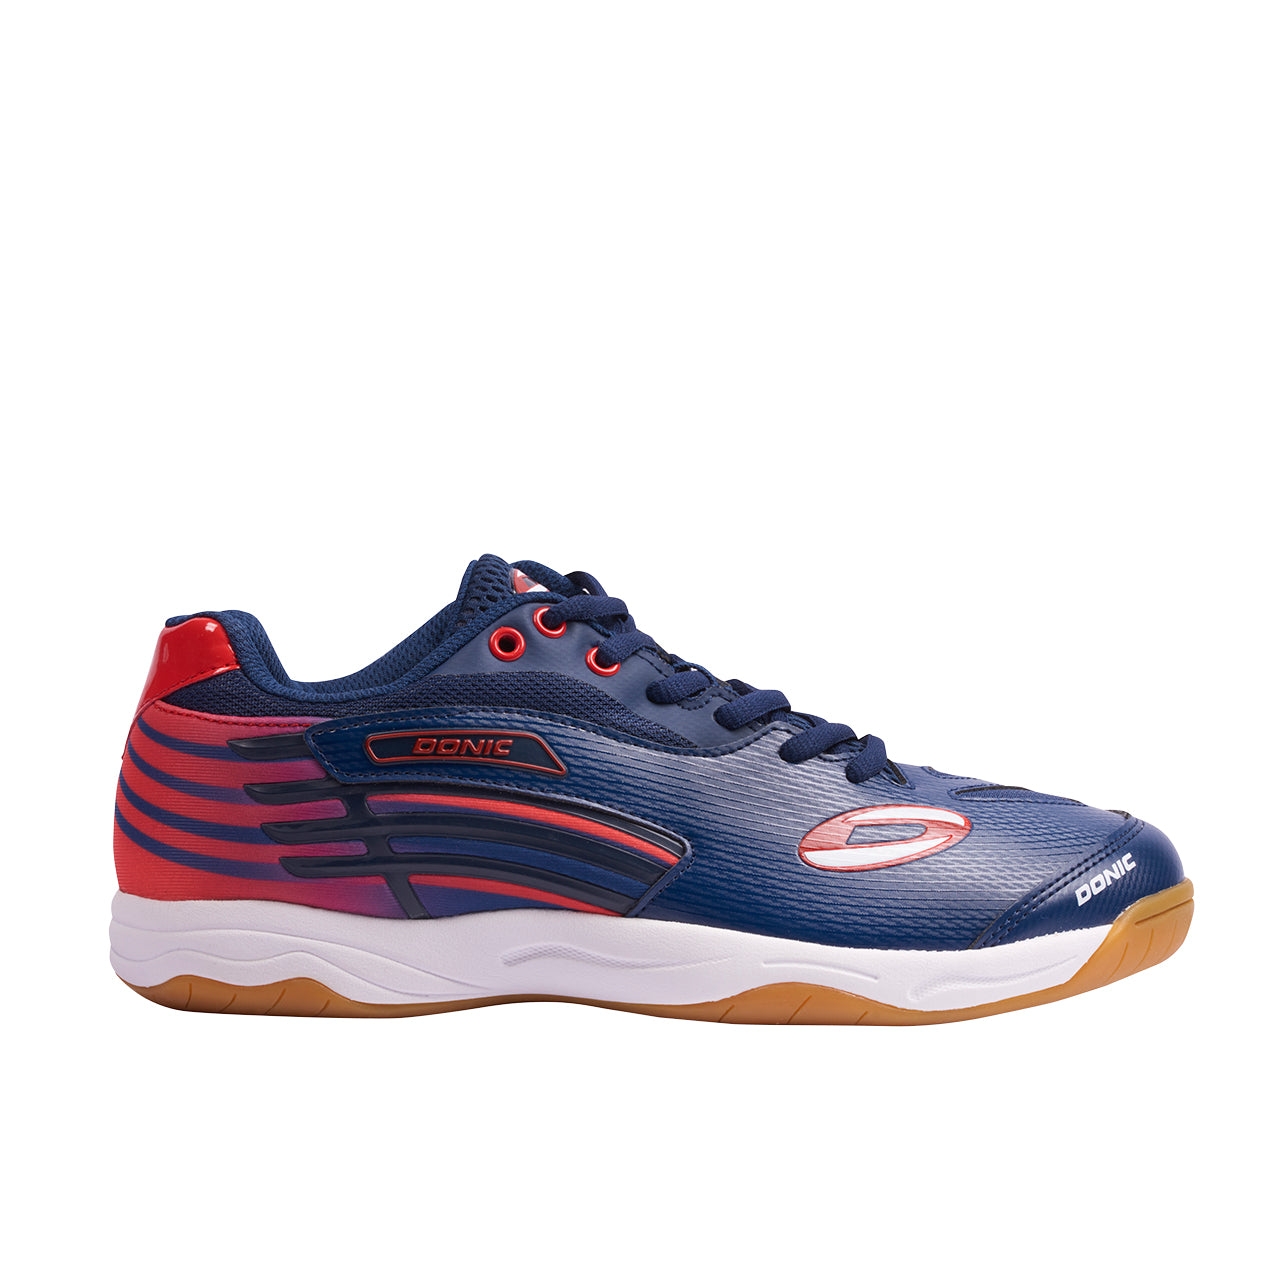 Donic Spaceflex Shoes - Navy